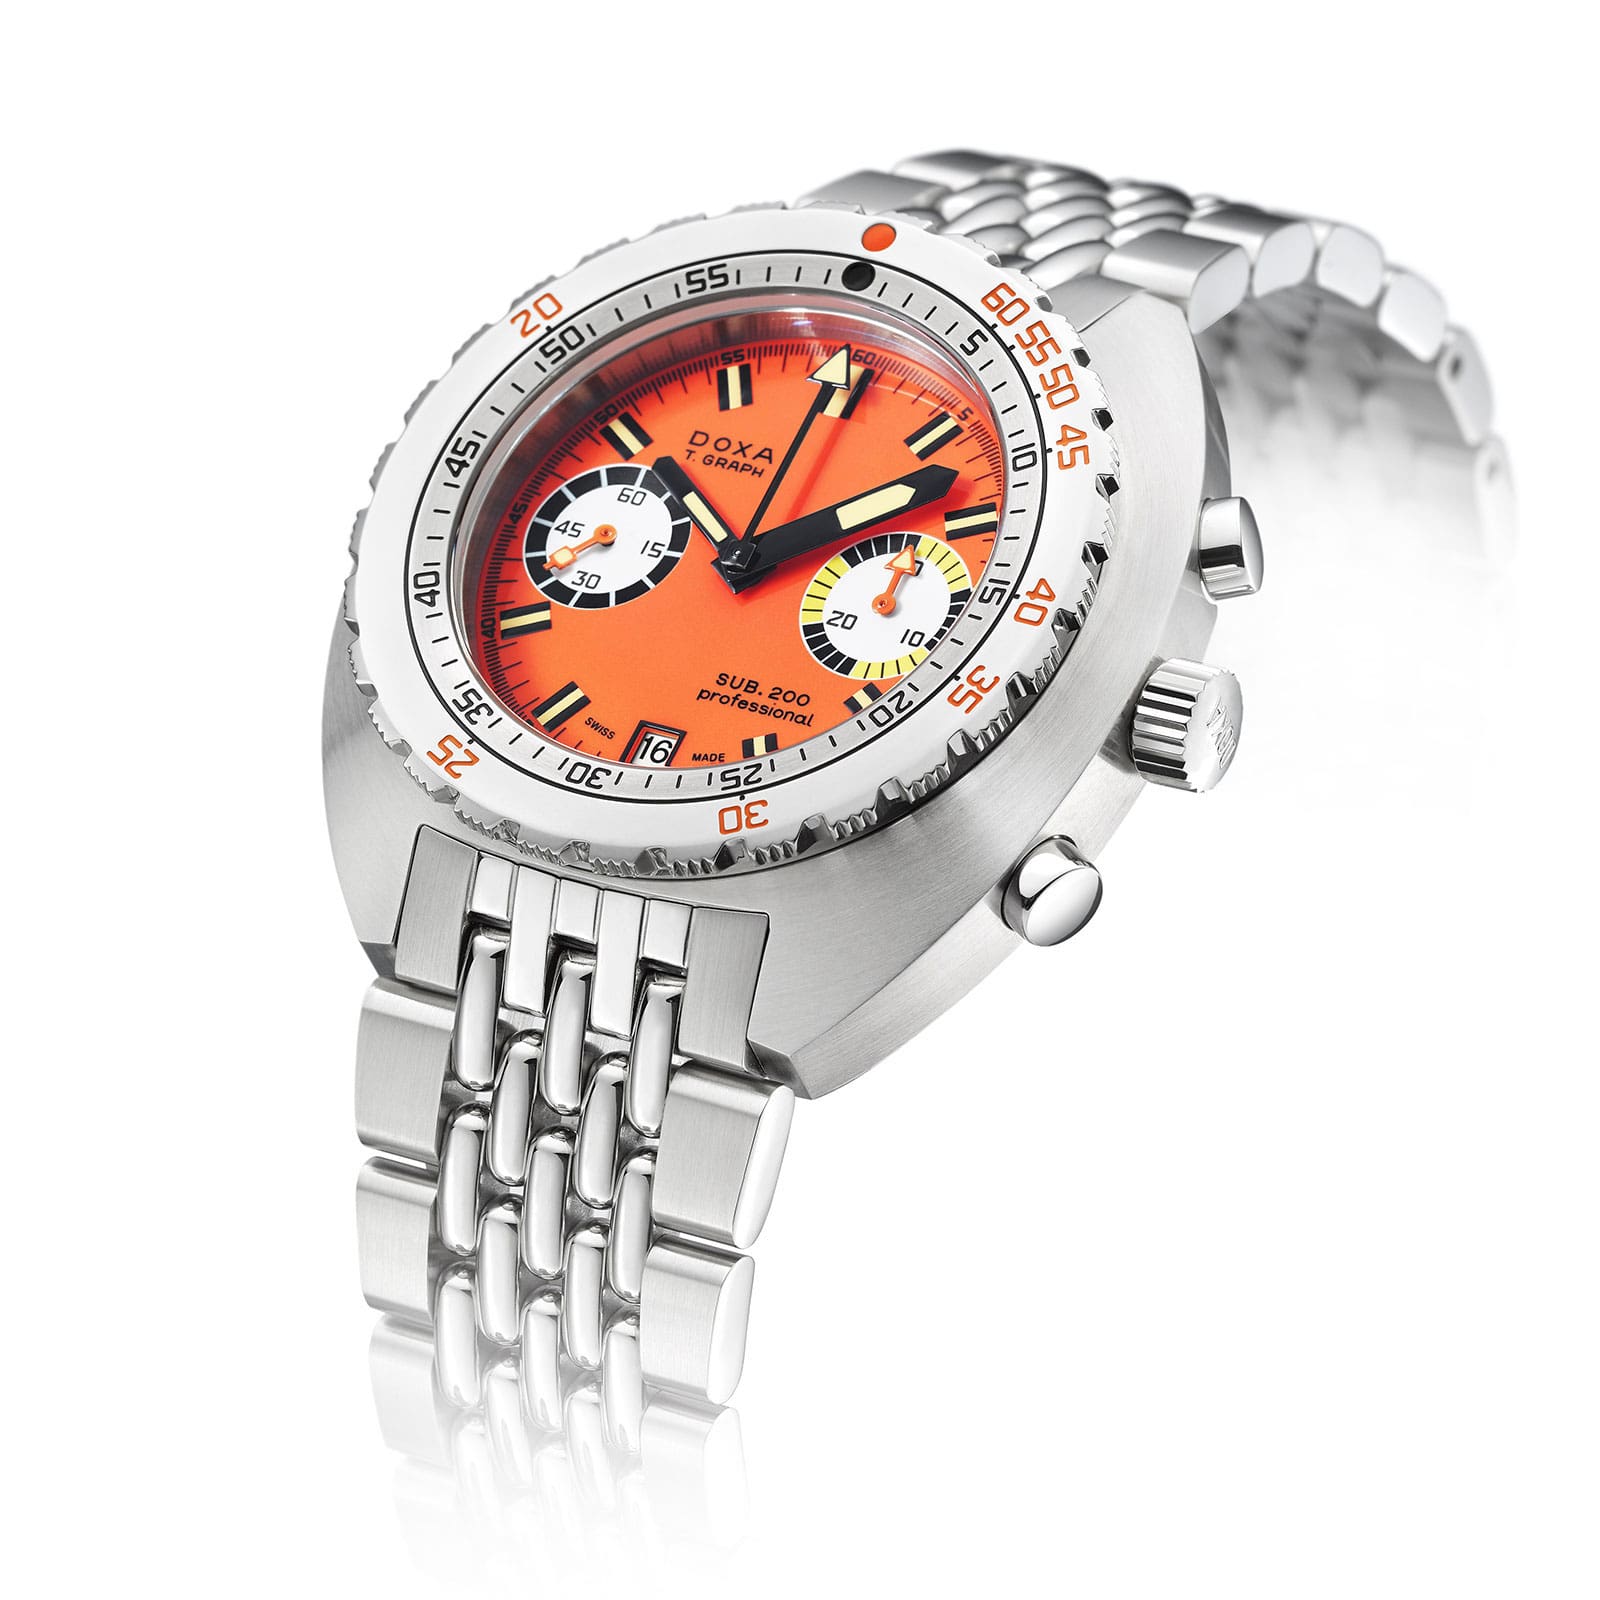 INTRODUCING: DOXA SUB 200 T.Graph Stainless Steel Limited Edition